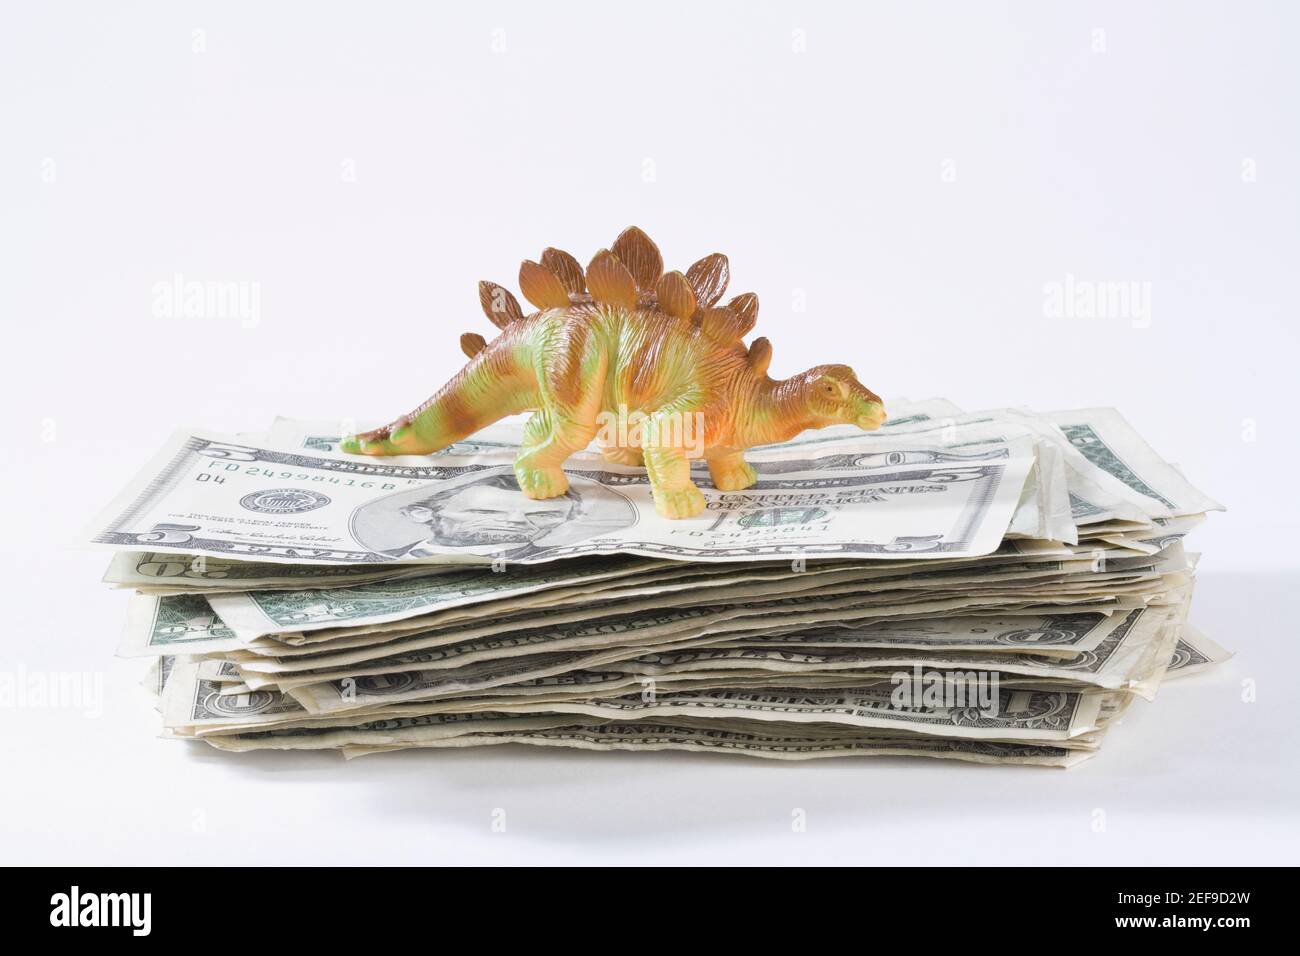 Close up of a figurine of a dinosaur on a stack of US paper currency Stock Photo